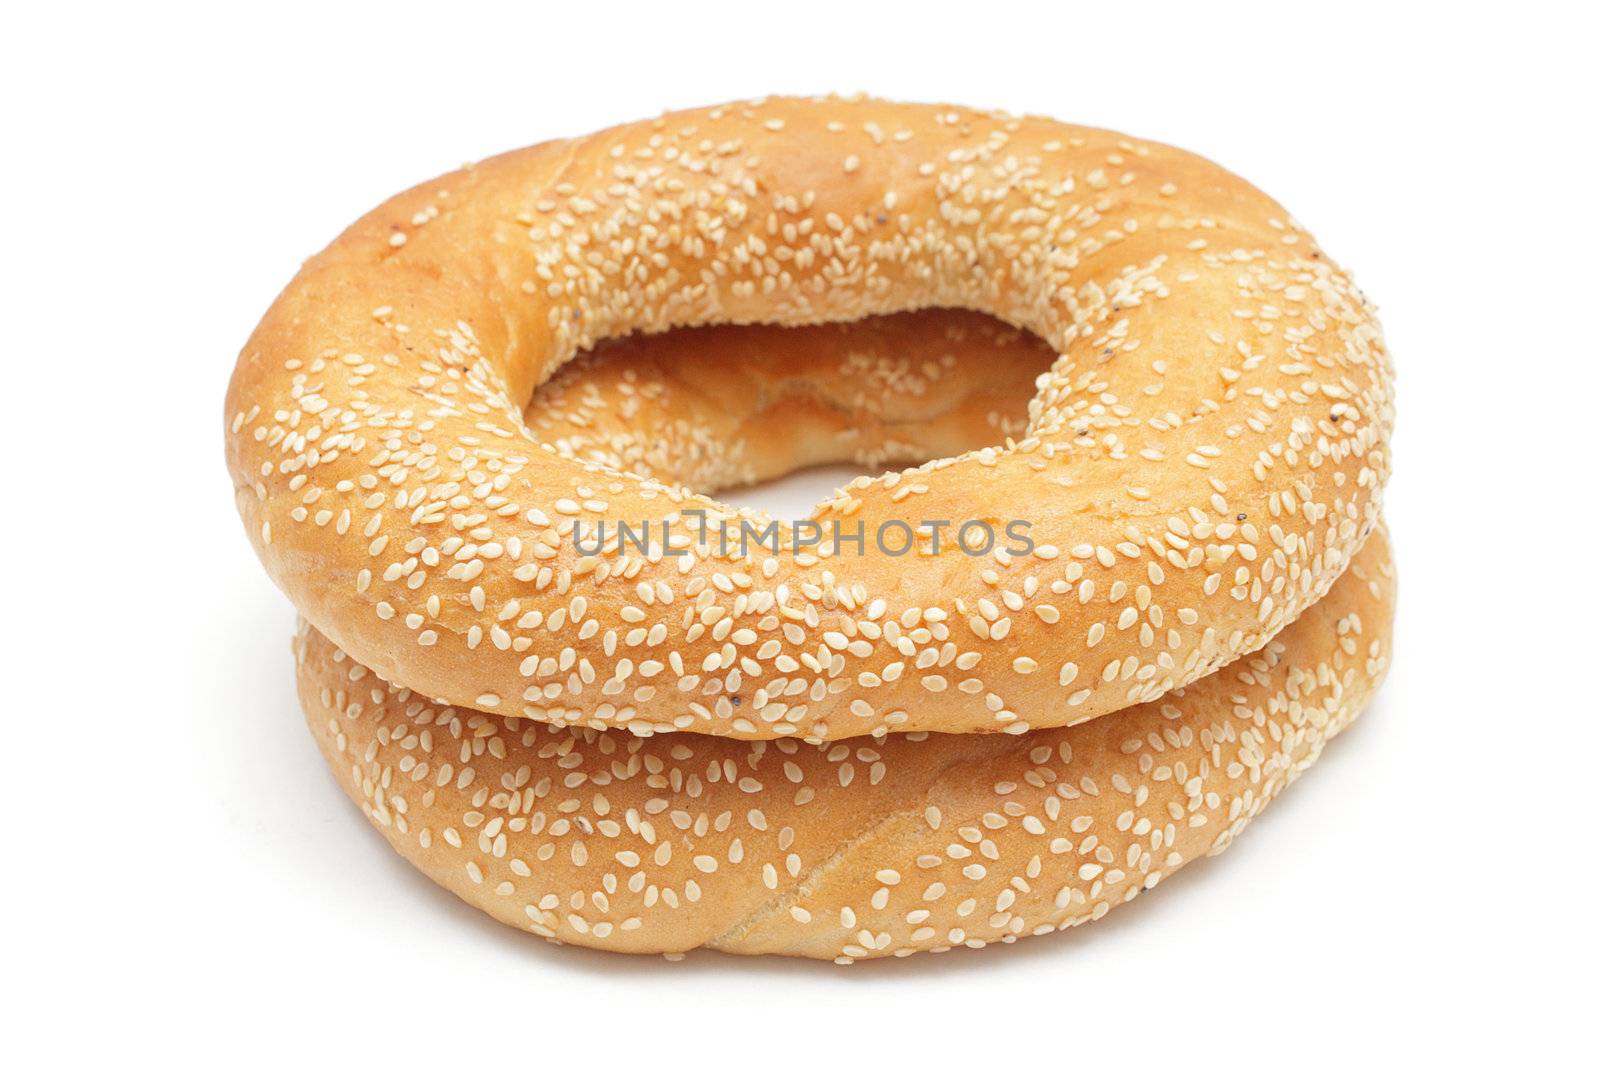 Two bagels with sesame seeds isolated on white background